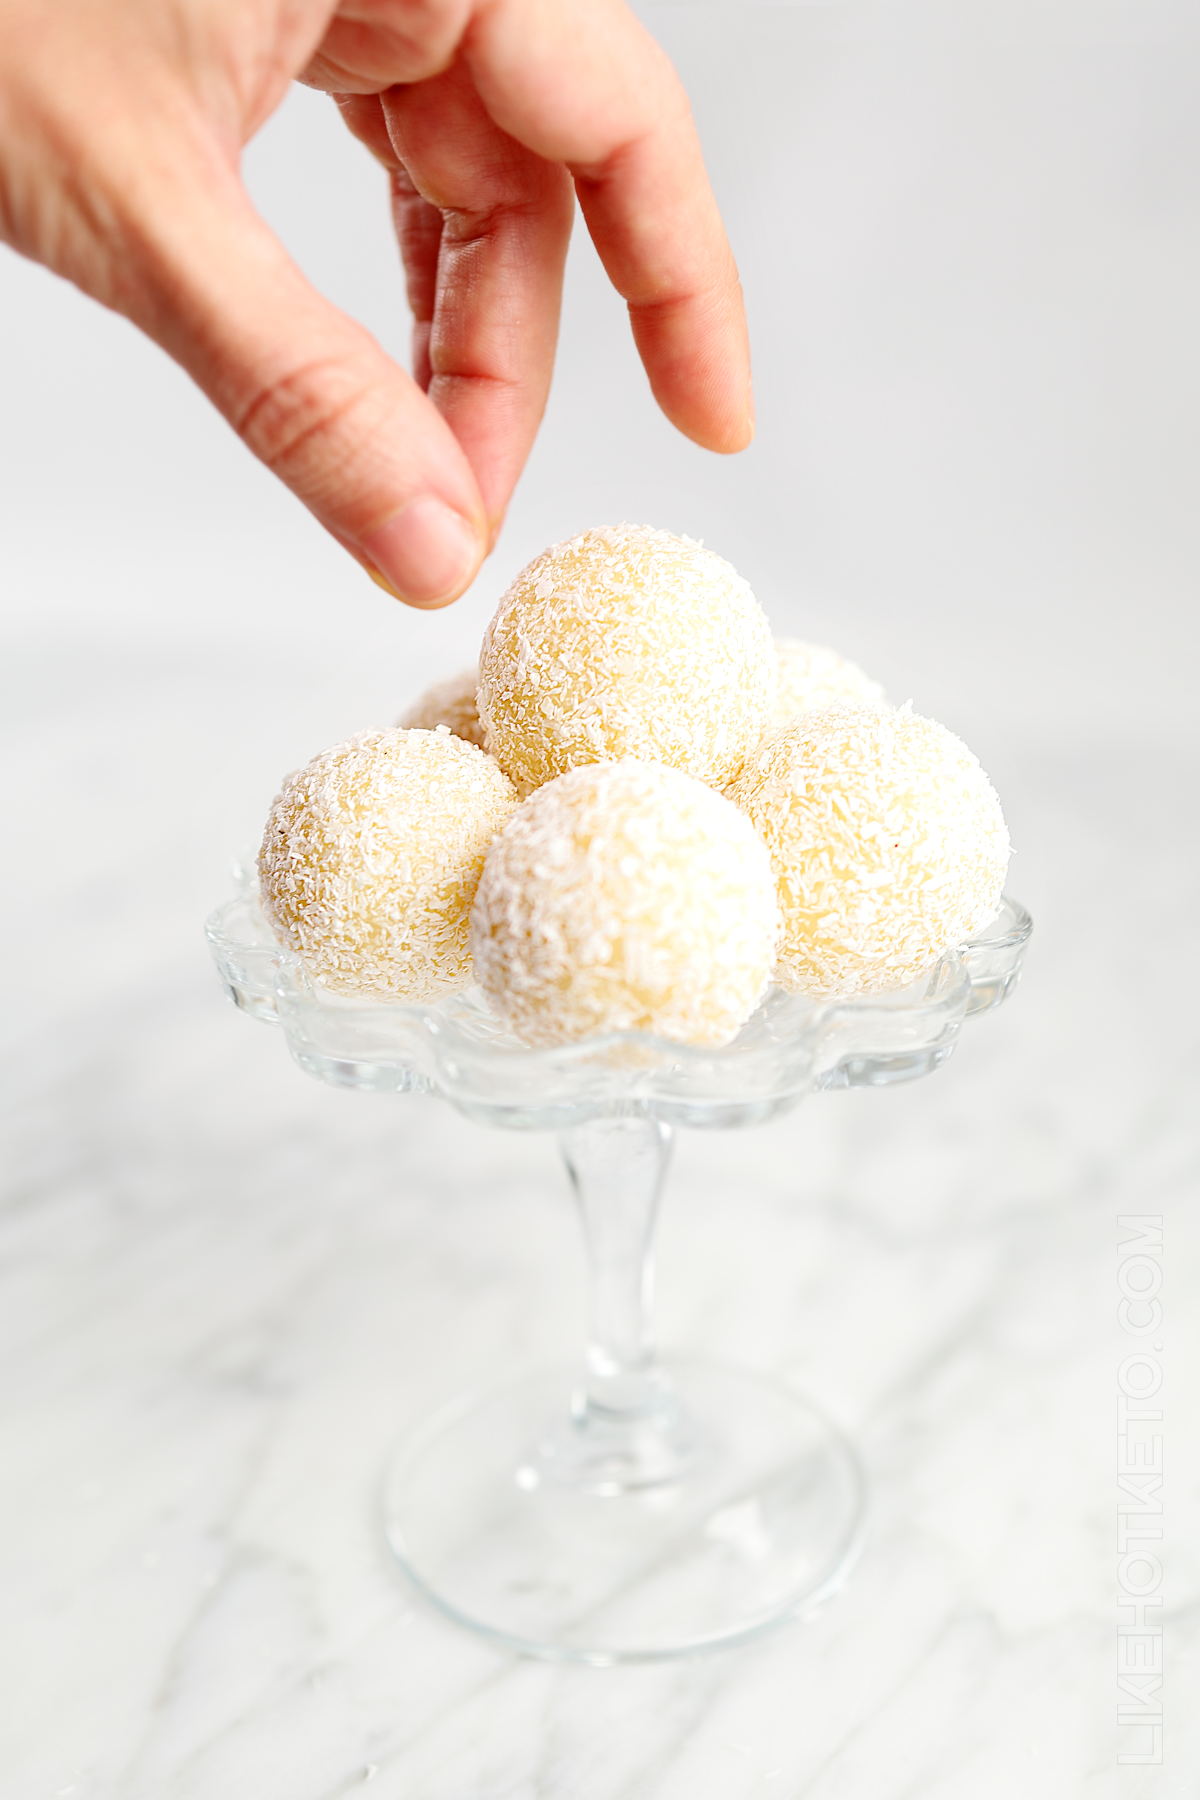 Keto coconut truffles arranged in a glass stand.